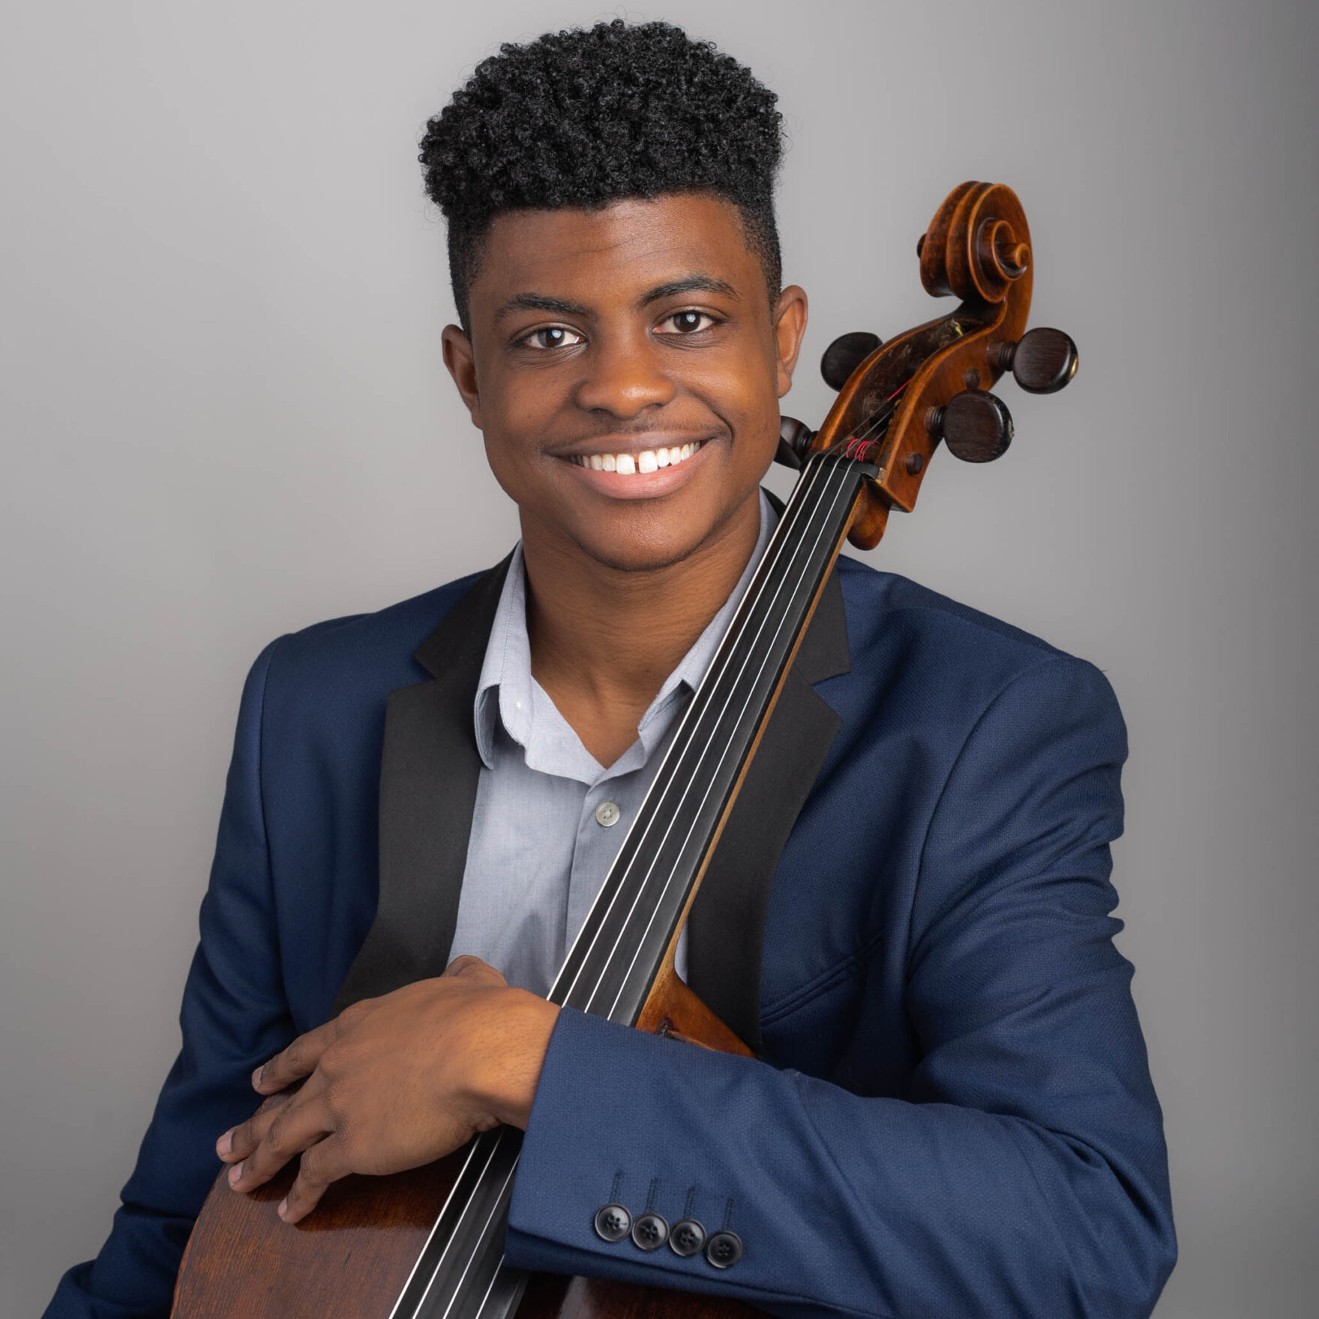 A young Black man dressed in a light blue shirt and dark blue jacket, smiles at the camera while holding a cello